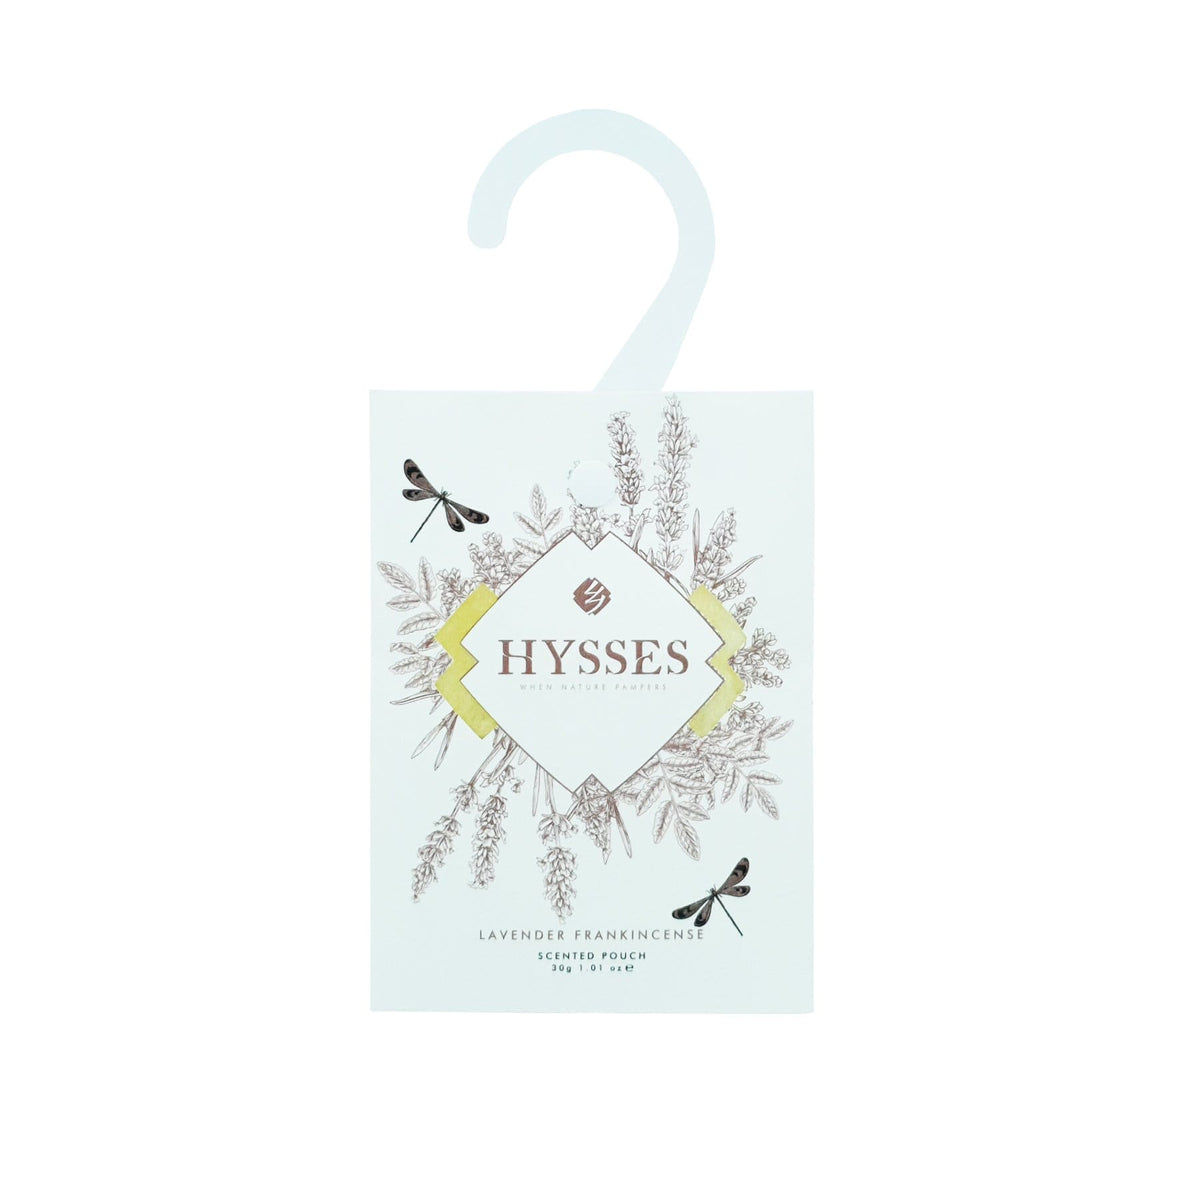 Hysses Home Scents Scented Pouch, Lavender Frankincense